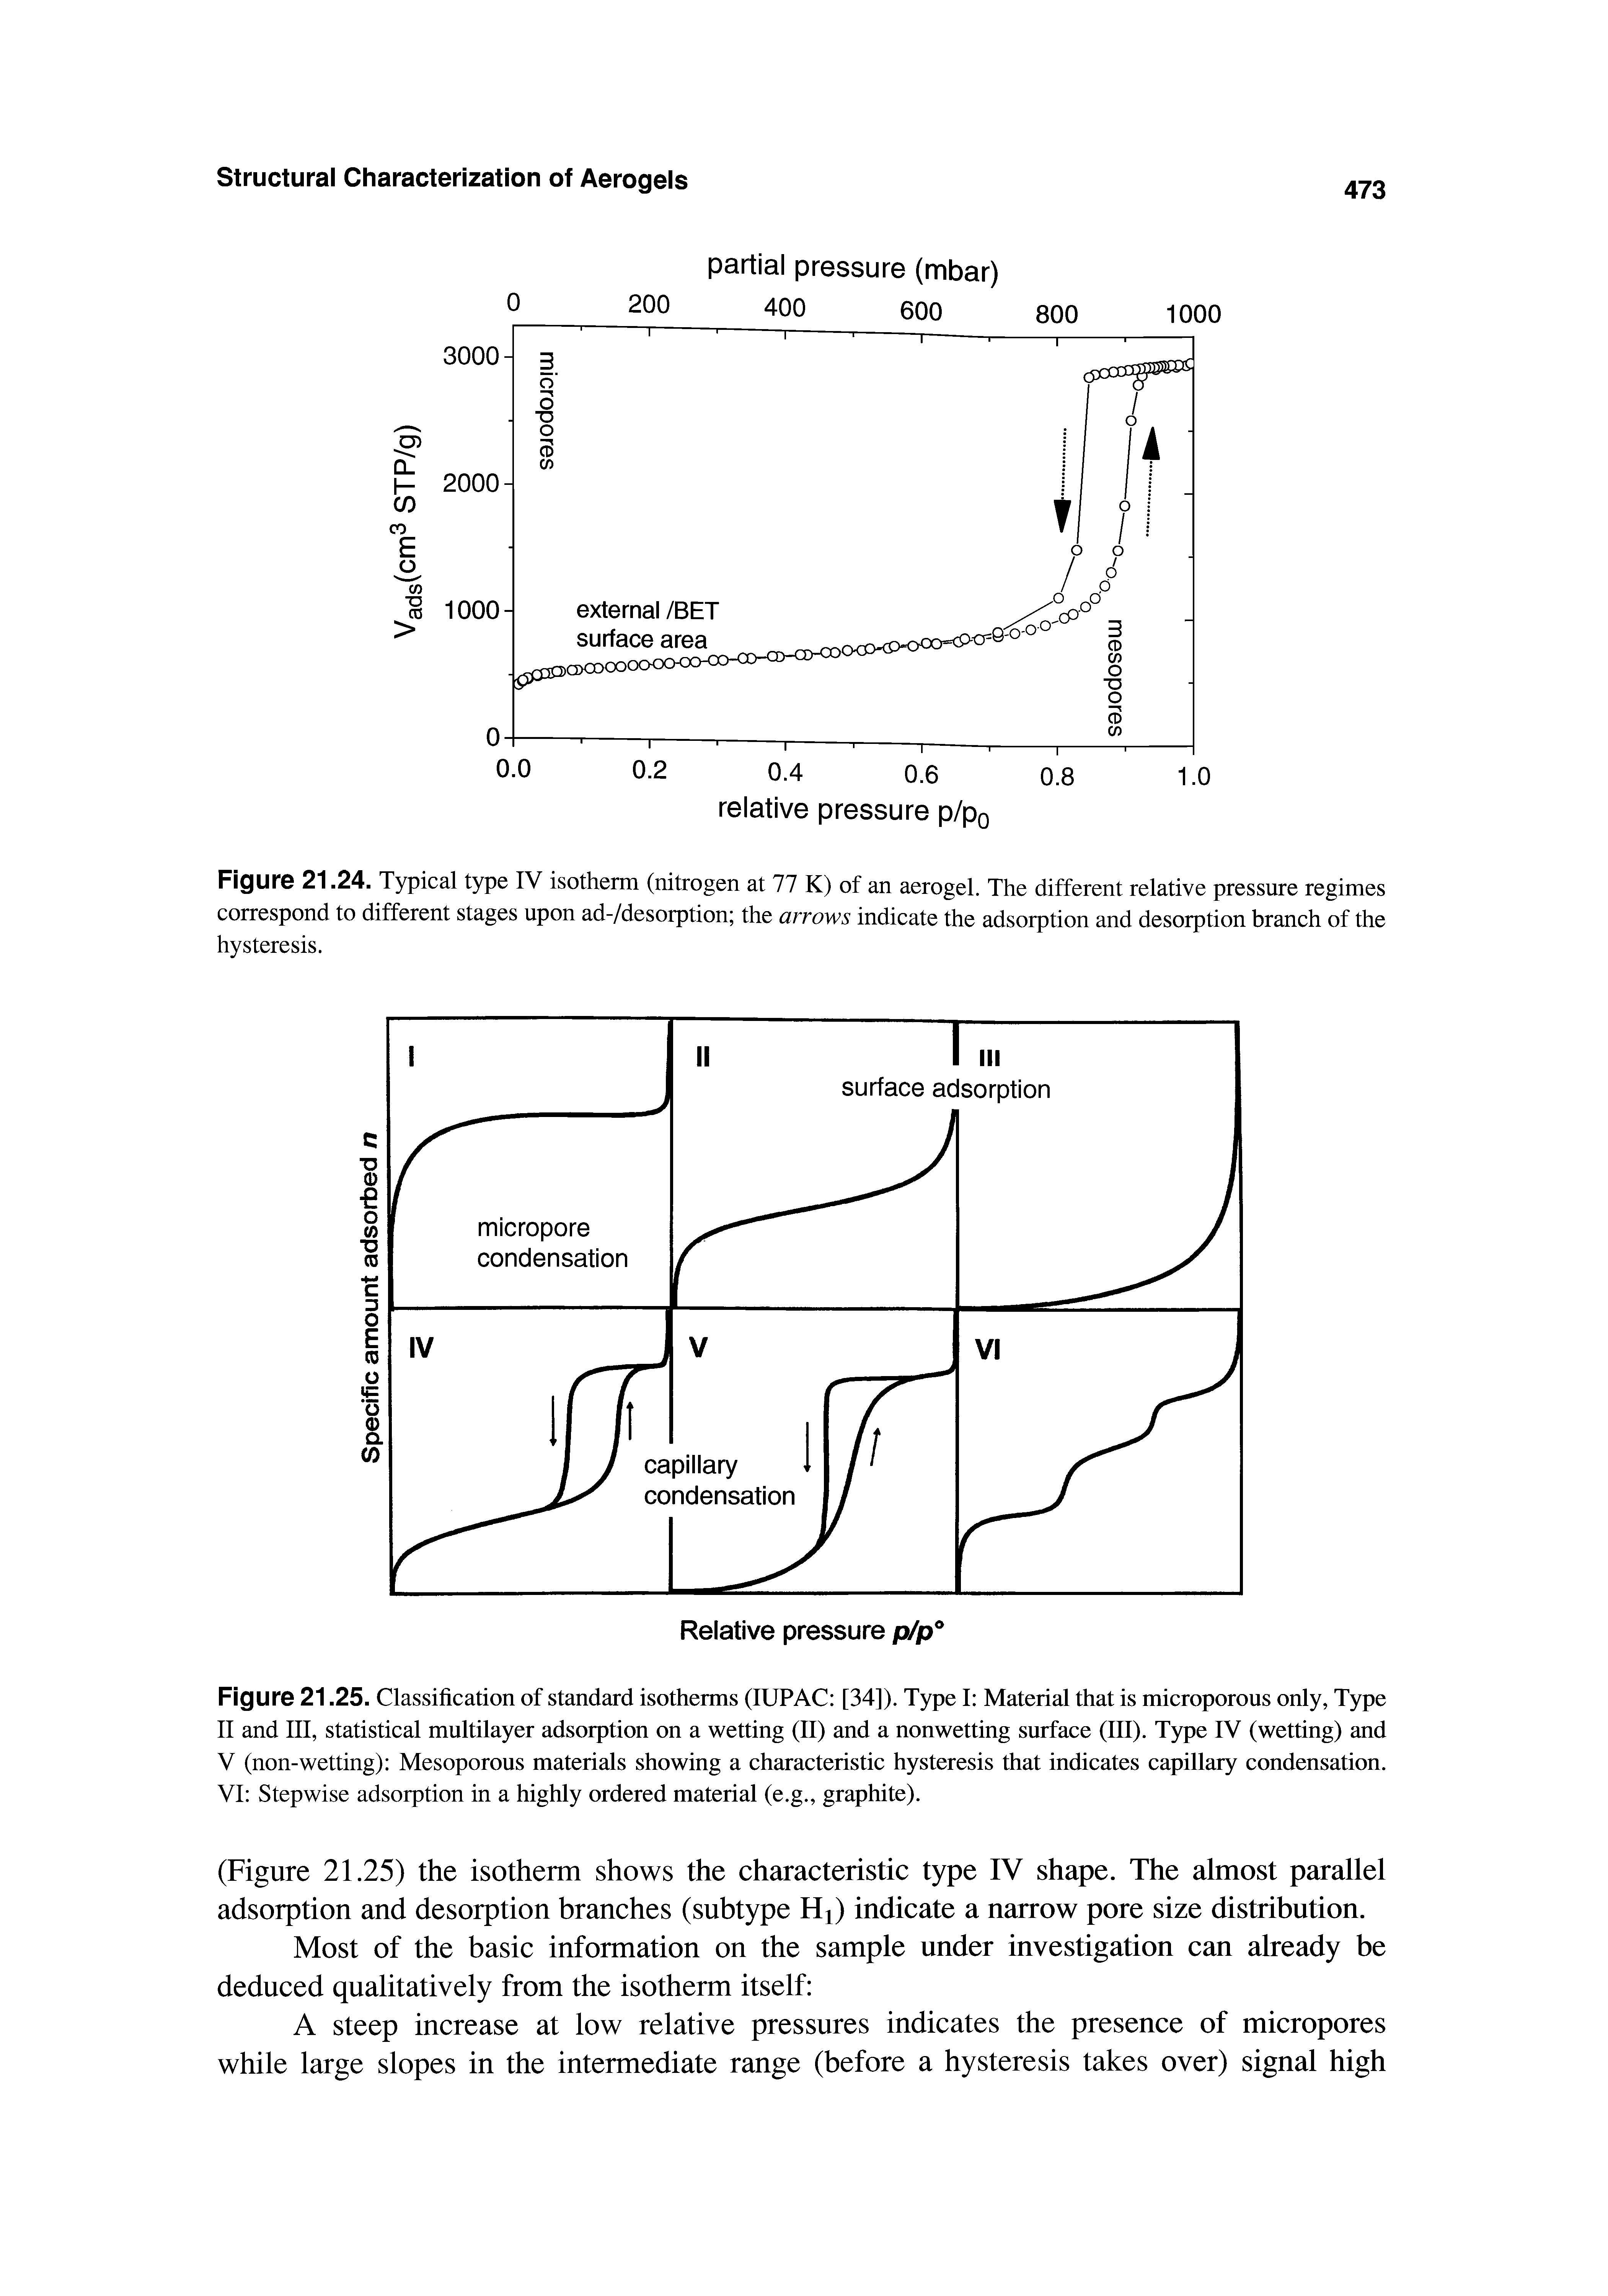 Figure 21.25. Classification of standard isotherms (lUPAC [34]). Type I Material that is microporous only, Type II and III, statistical multilayer adsorption on a wetting (II) and a nonwetting surface (III). Type IV (wetting) and V (non-wetting) Mesoporous materials showing a characteristic hysteresis that indicates capillary condensation. VI Stepwise adsorption in a highly ordered material (e.g., graphite).